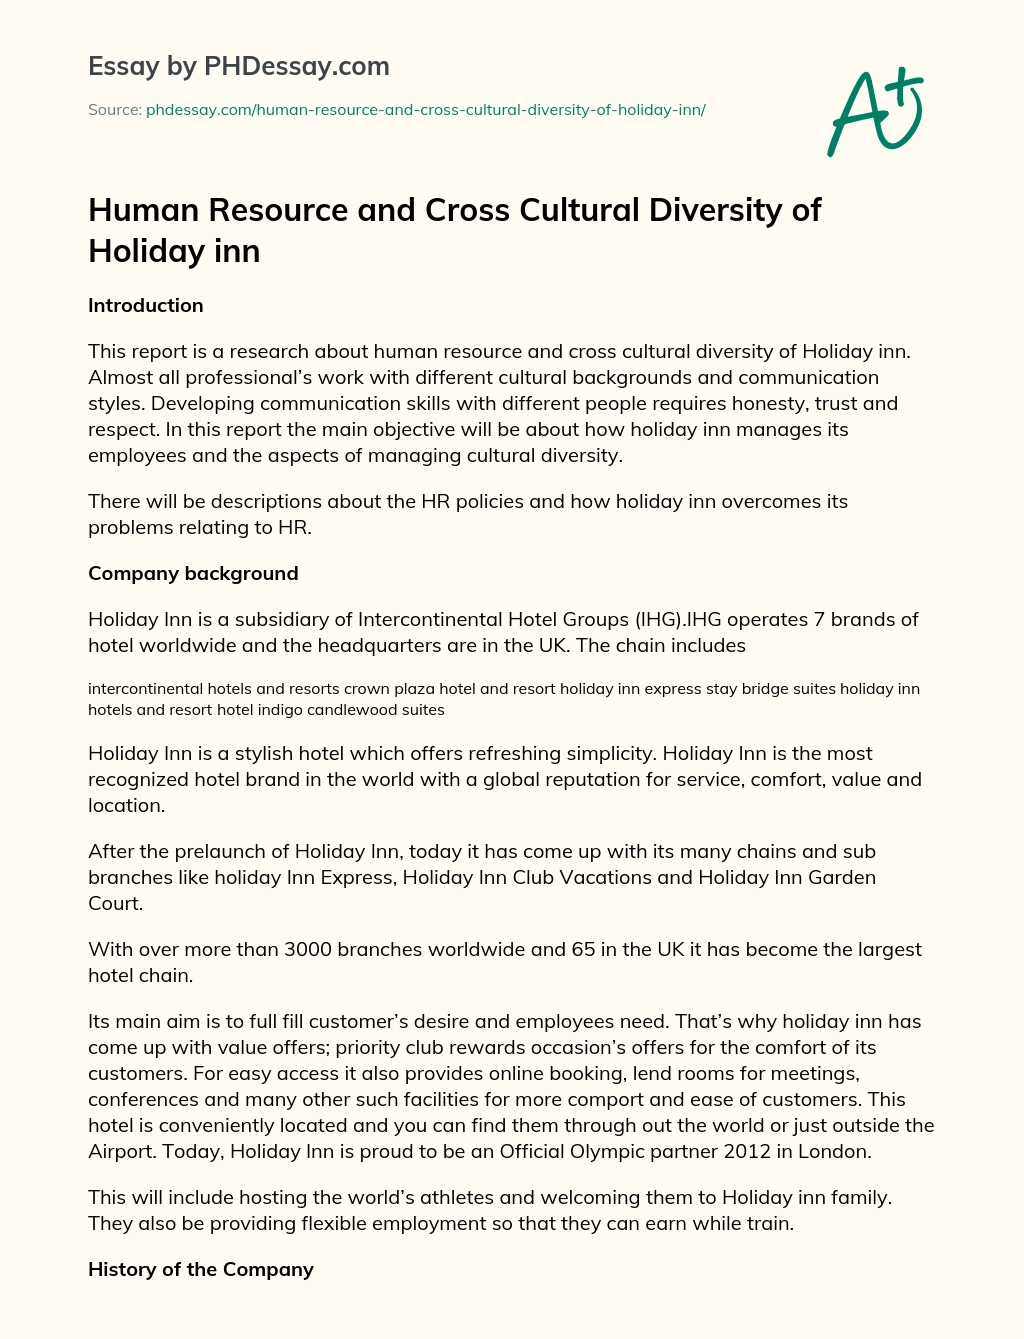 Human Resource and Cross Cultural Diversity of Holiday inn essay